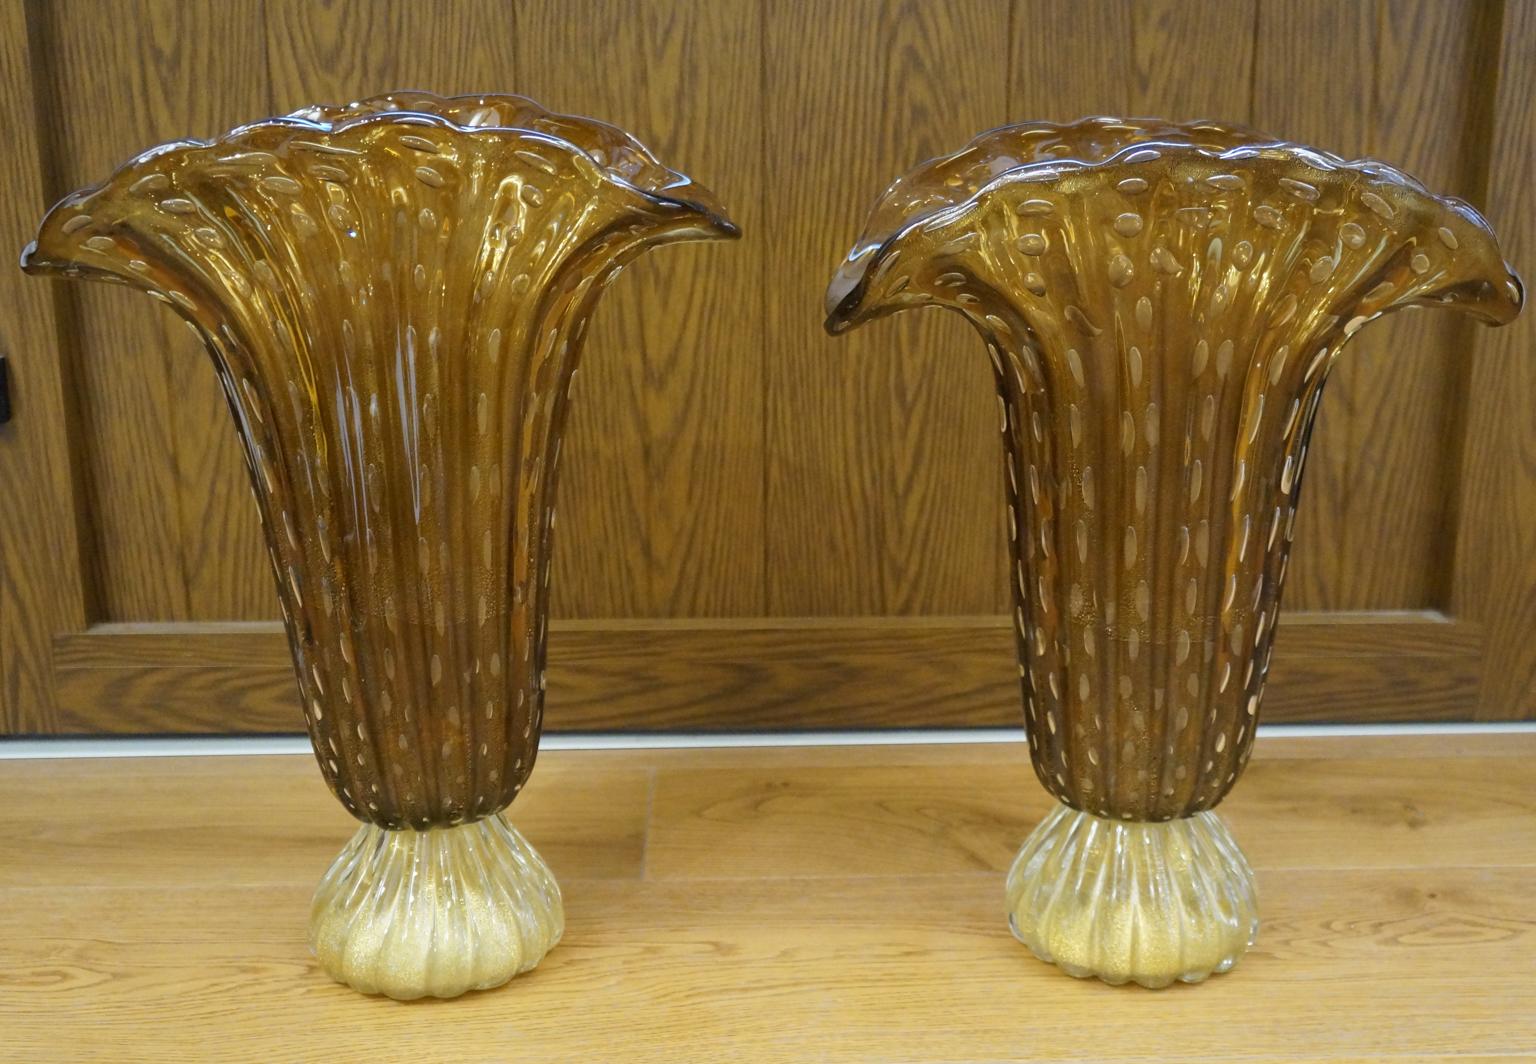 Designed in 1987 by Toso Murano, these vases are classic but rather elegant. They will give a touch of class to your room.
Tobacco color with 24-karat gold leaf decoration and internal bubbles. 
Project by Toso Murano in 1987s
Vases signed with